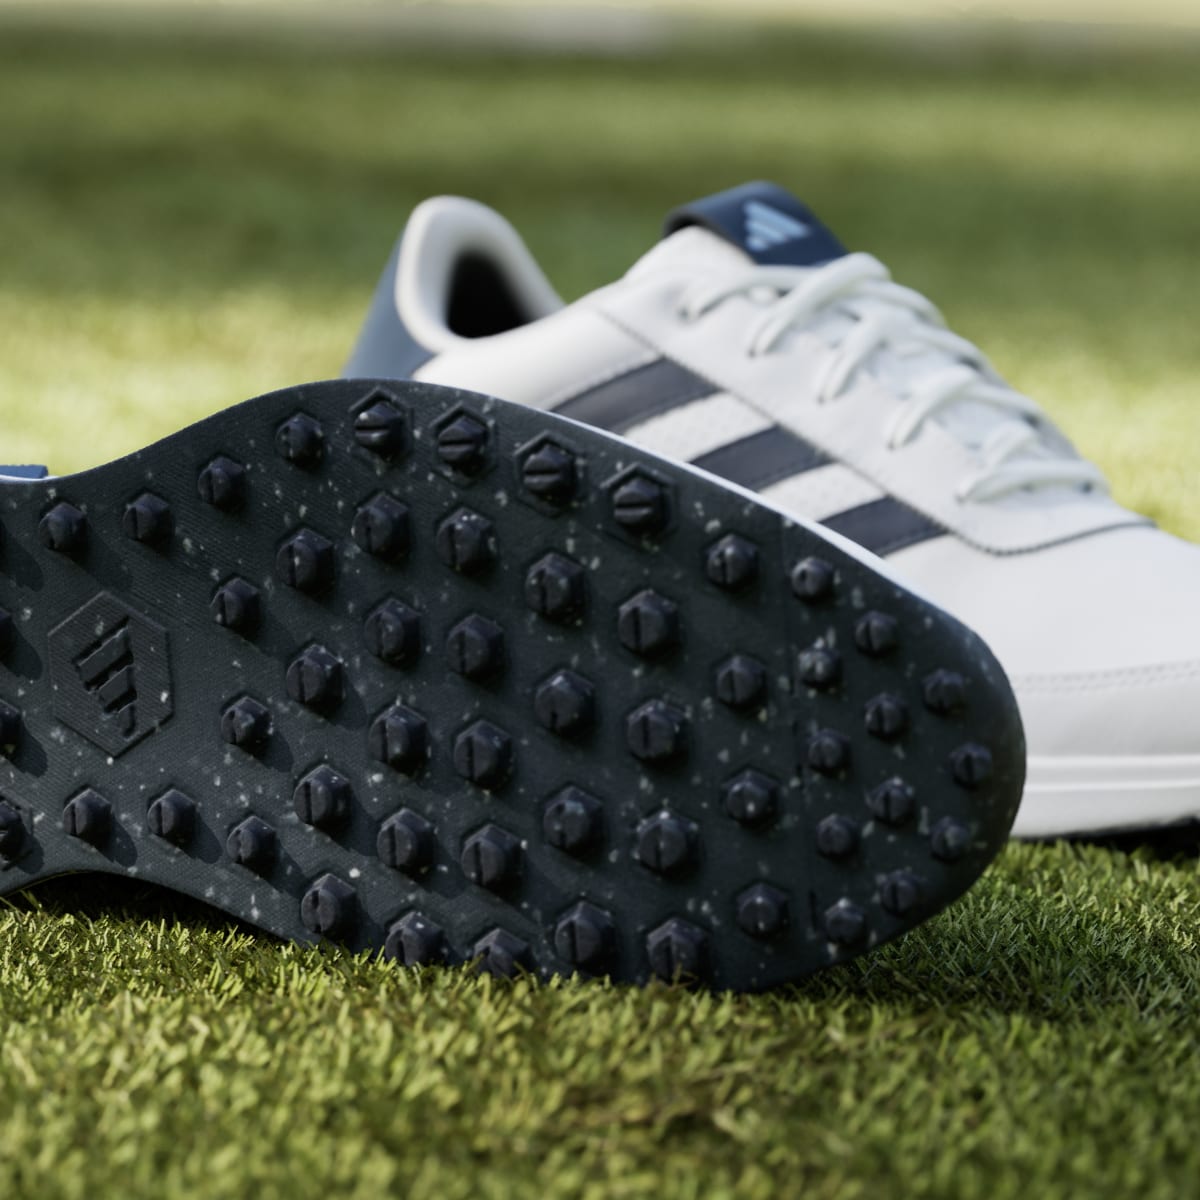 Adidas S2G Spikeless Leather 24 Golf Shoes. 8